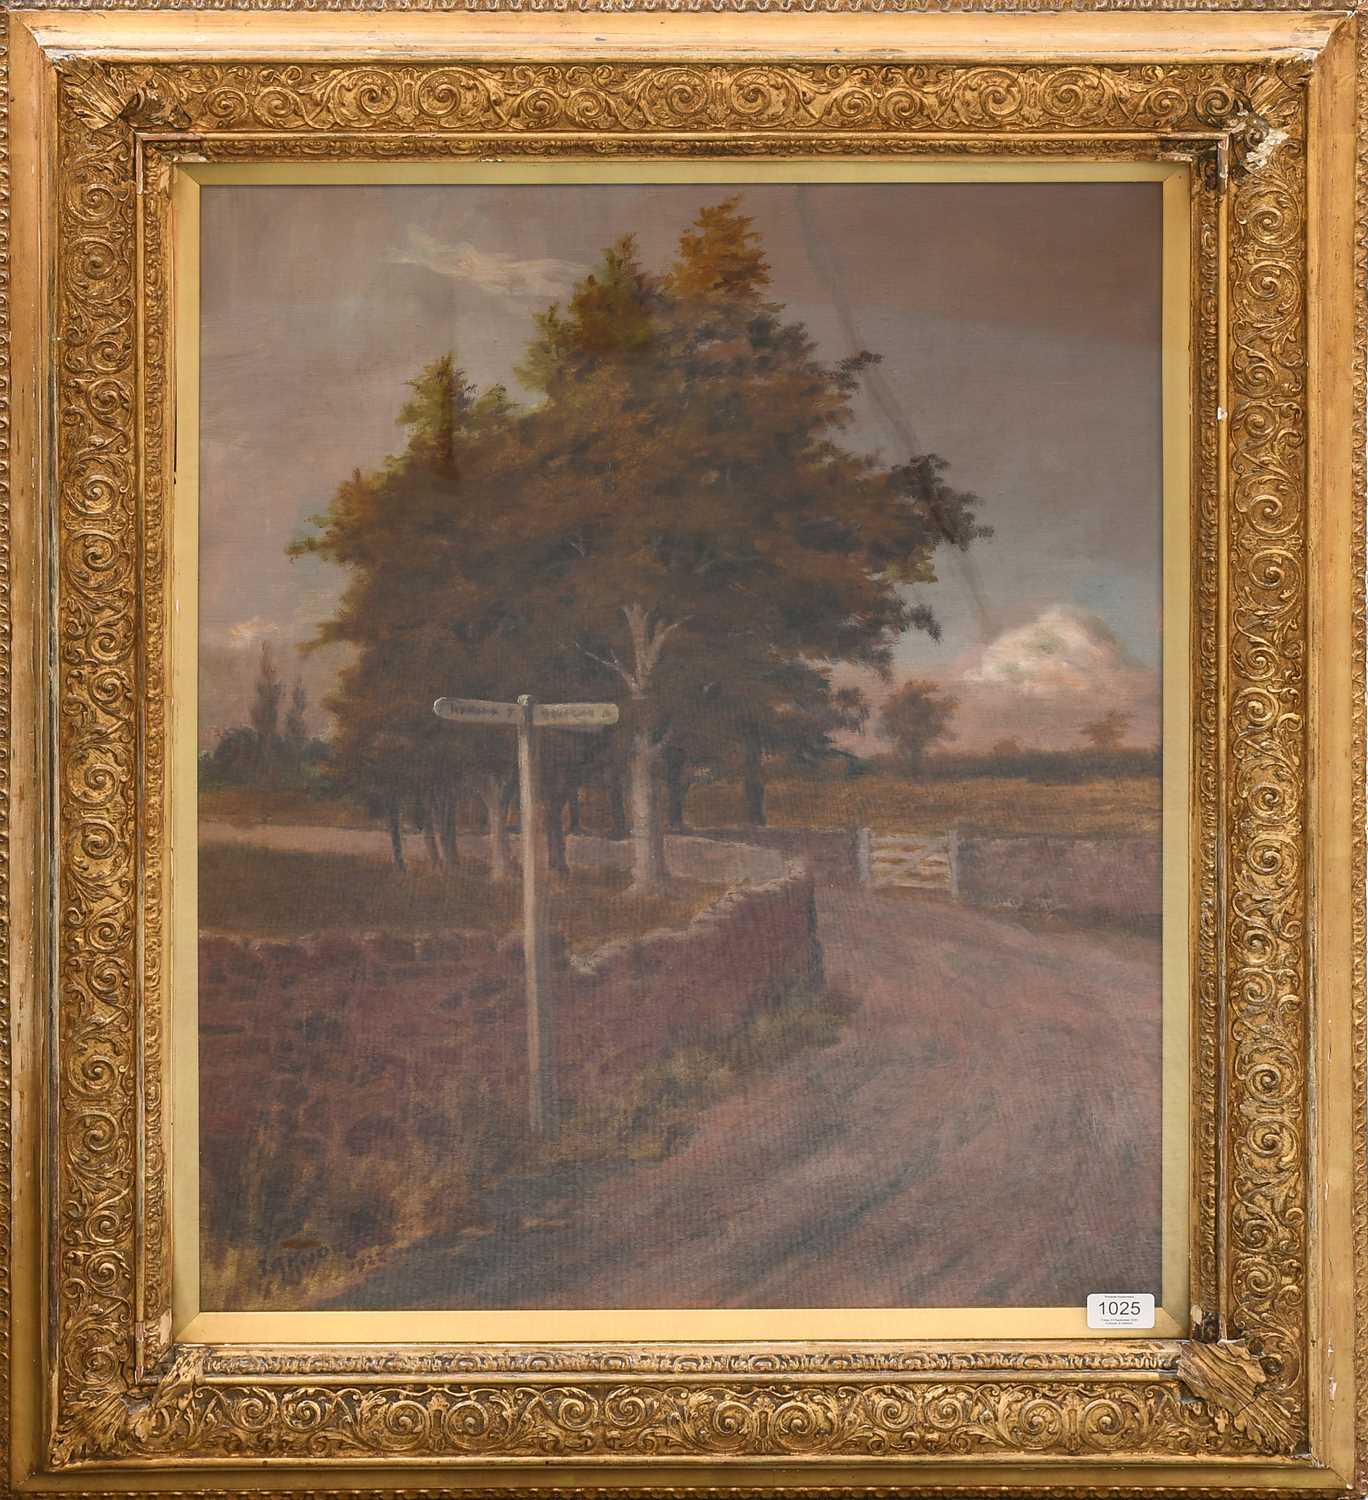 S A Knowles (20th century) Wooded country lane with signpostSigned and dated 1922, oil on canvas, - Image 2 of 2